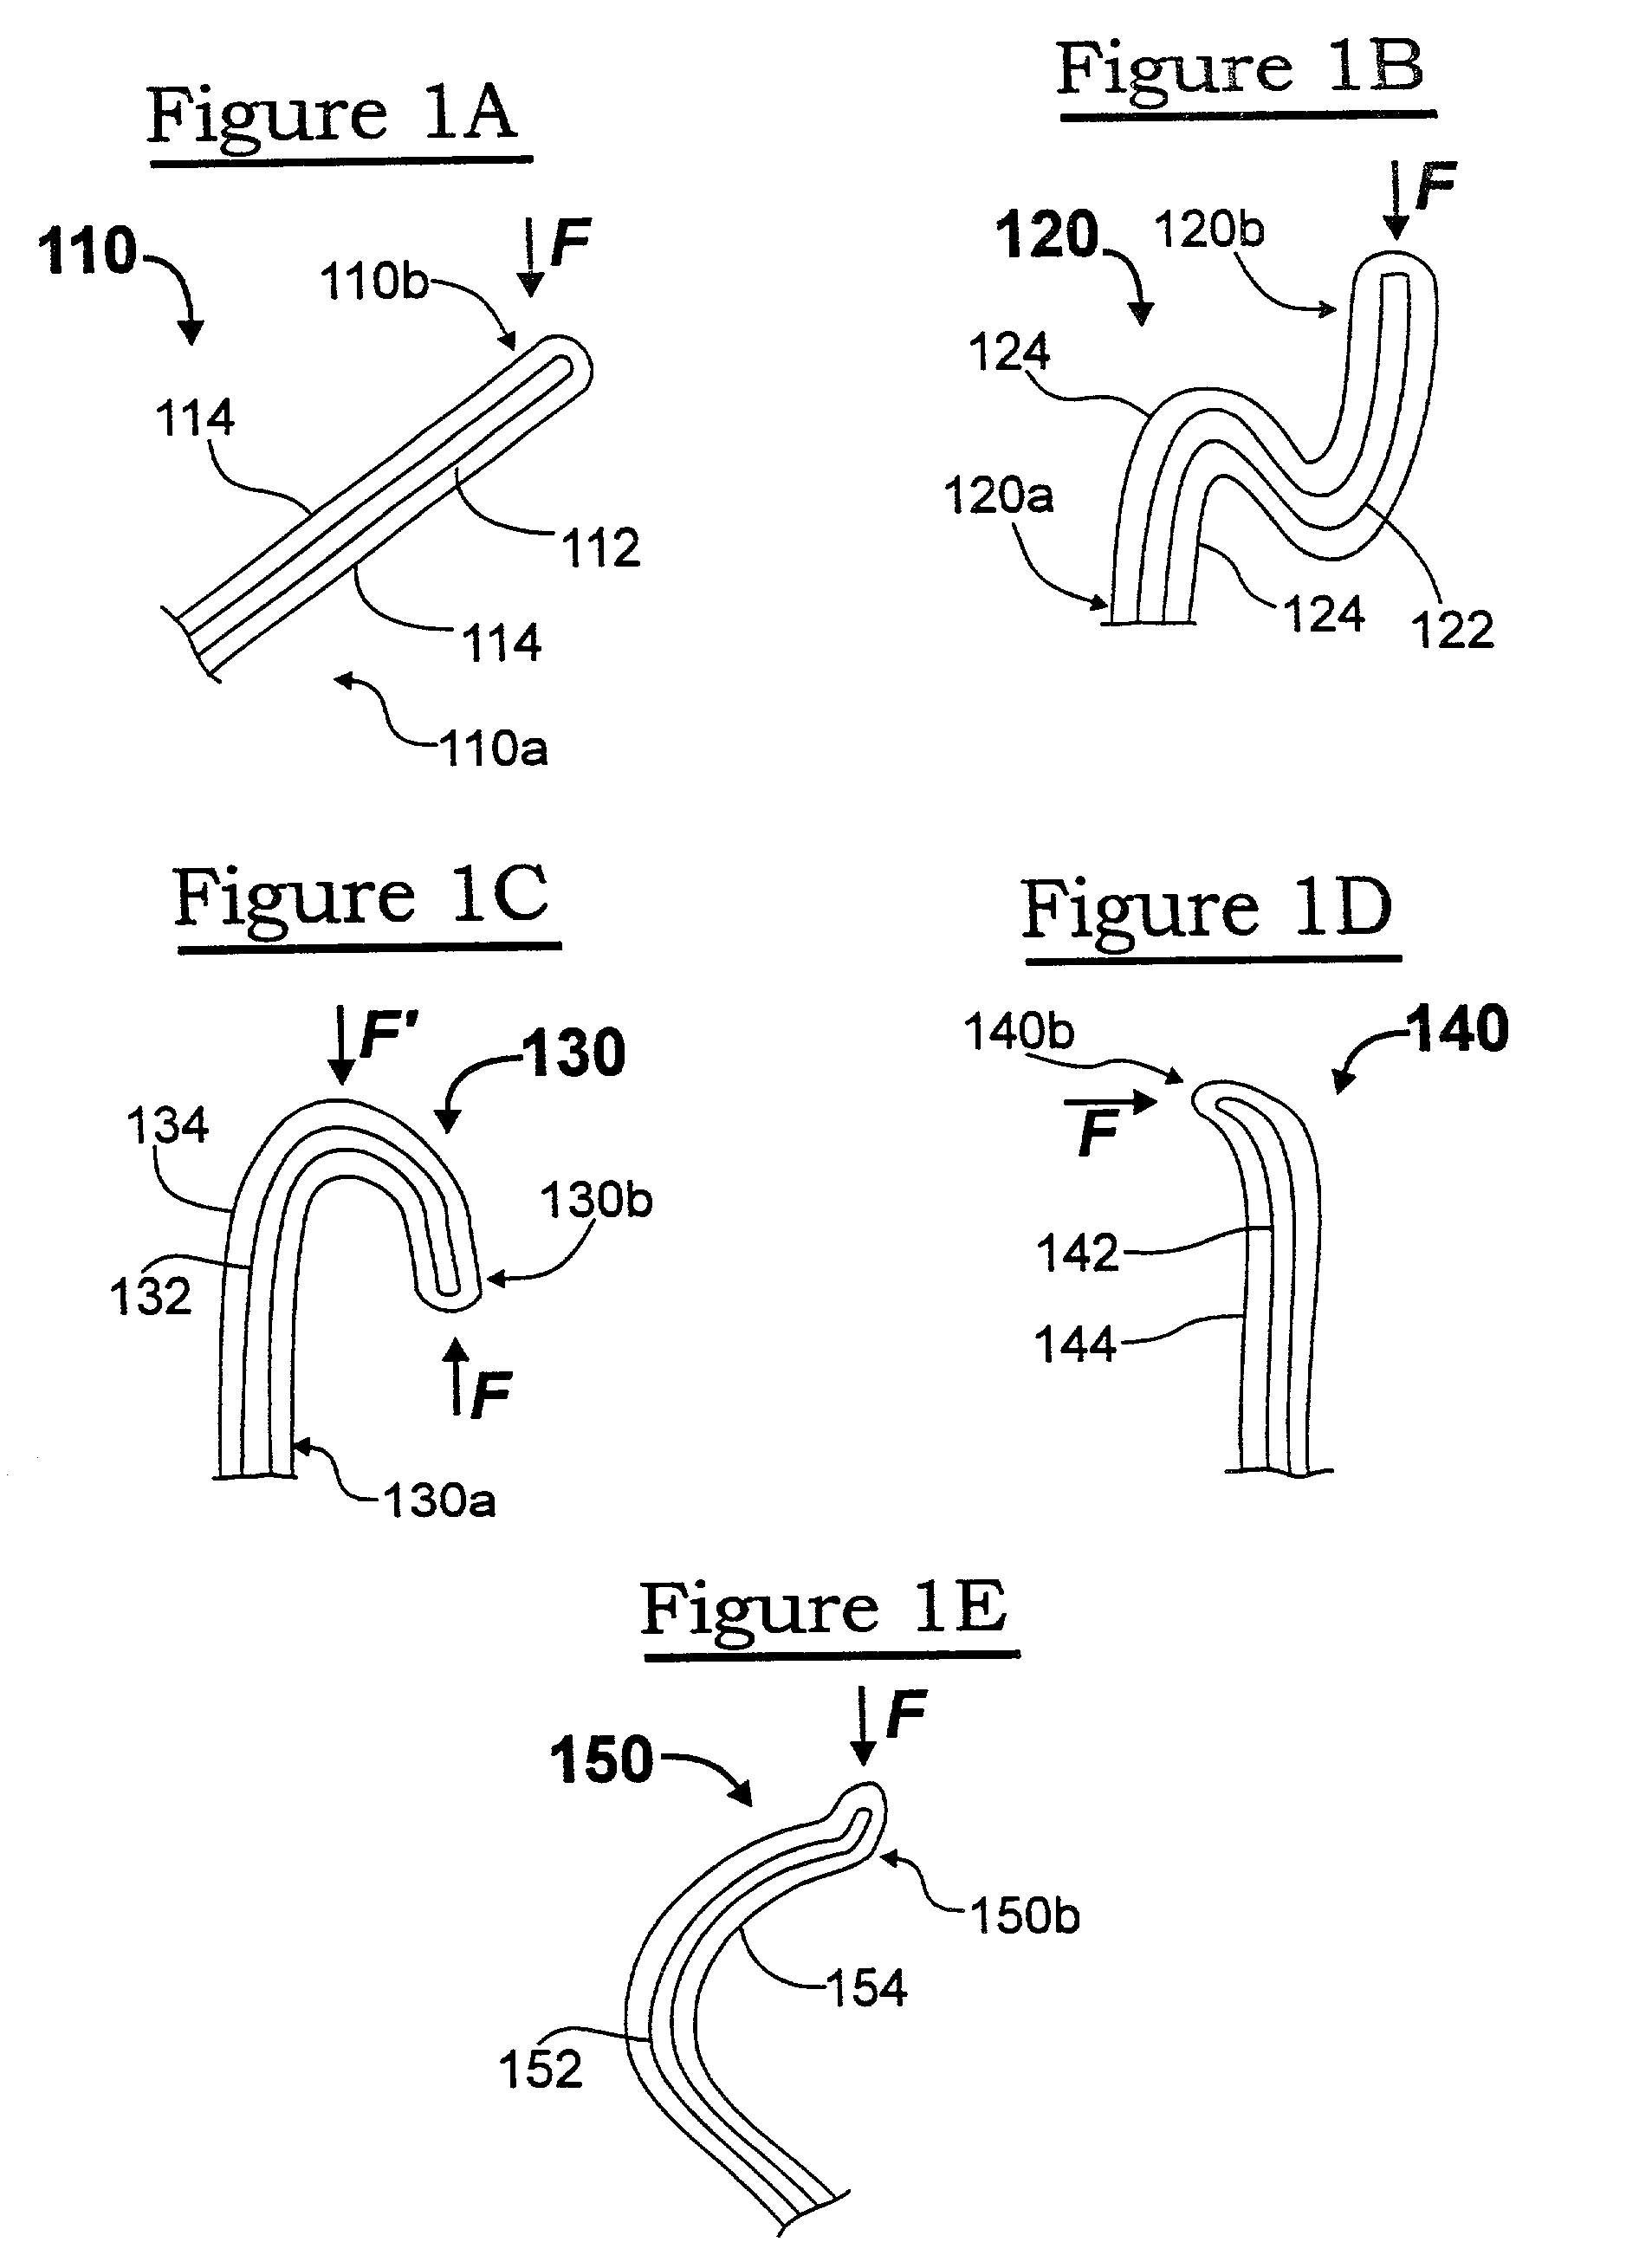 Method of making a contact structure with a distinctly formed tip structure